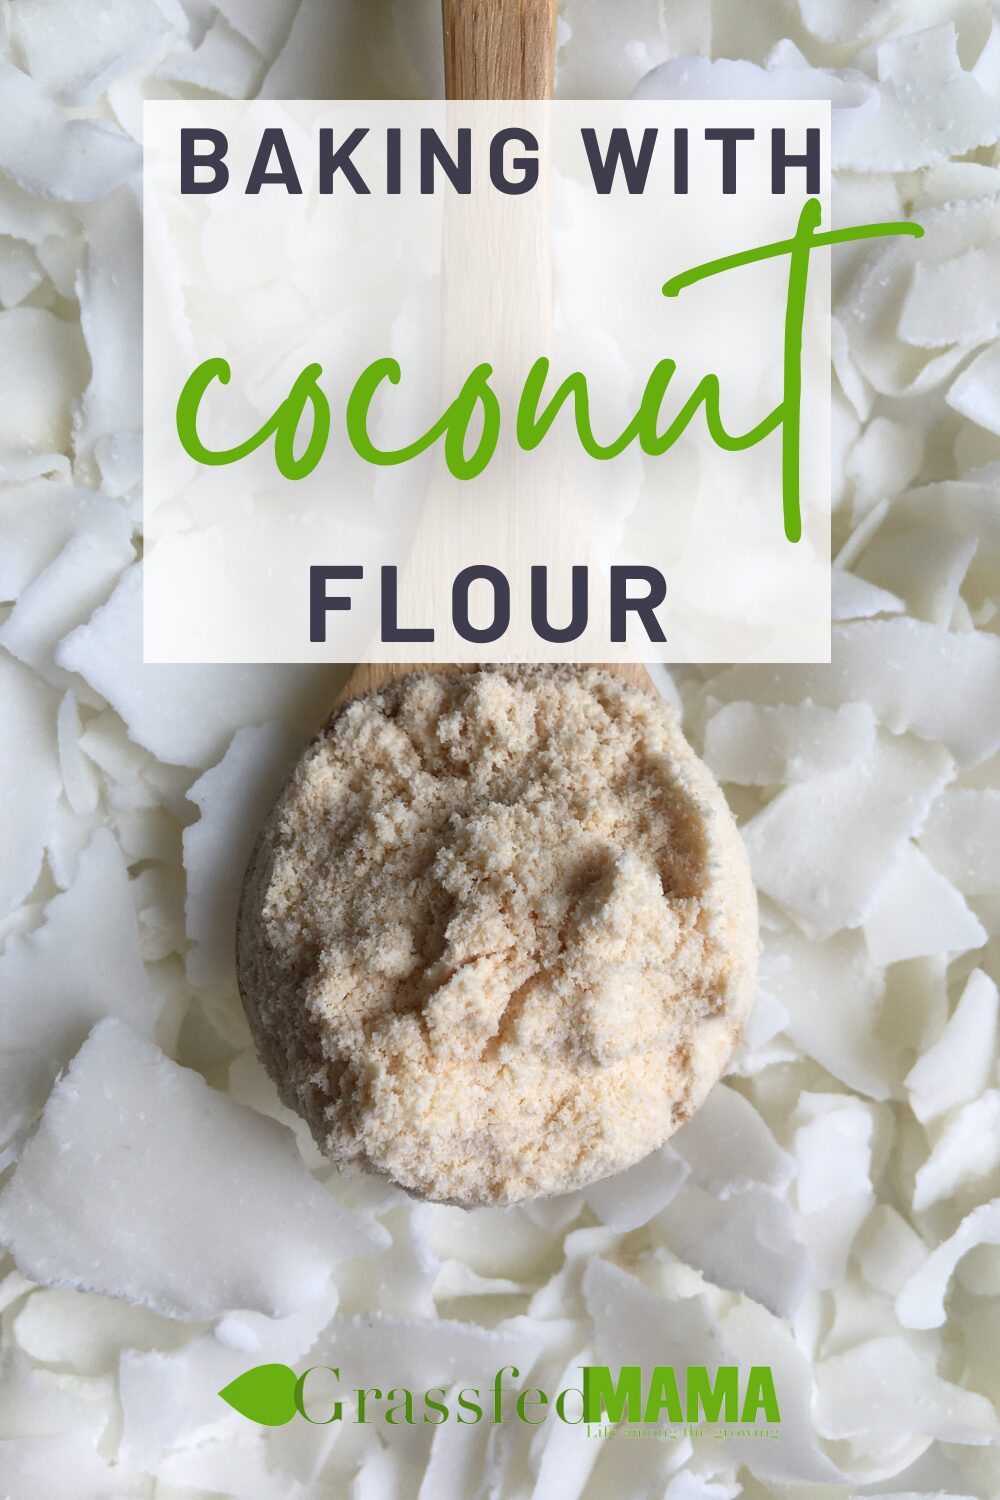 Baking with Coconut Flour